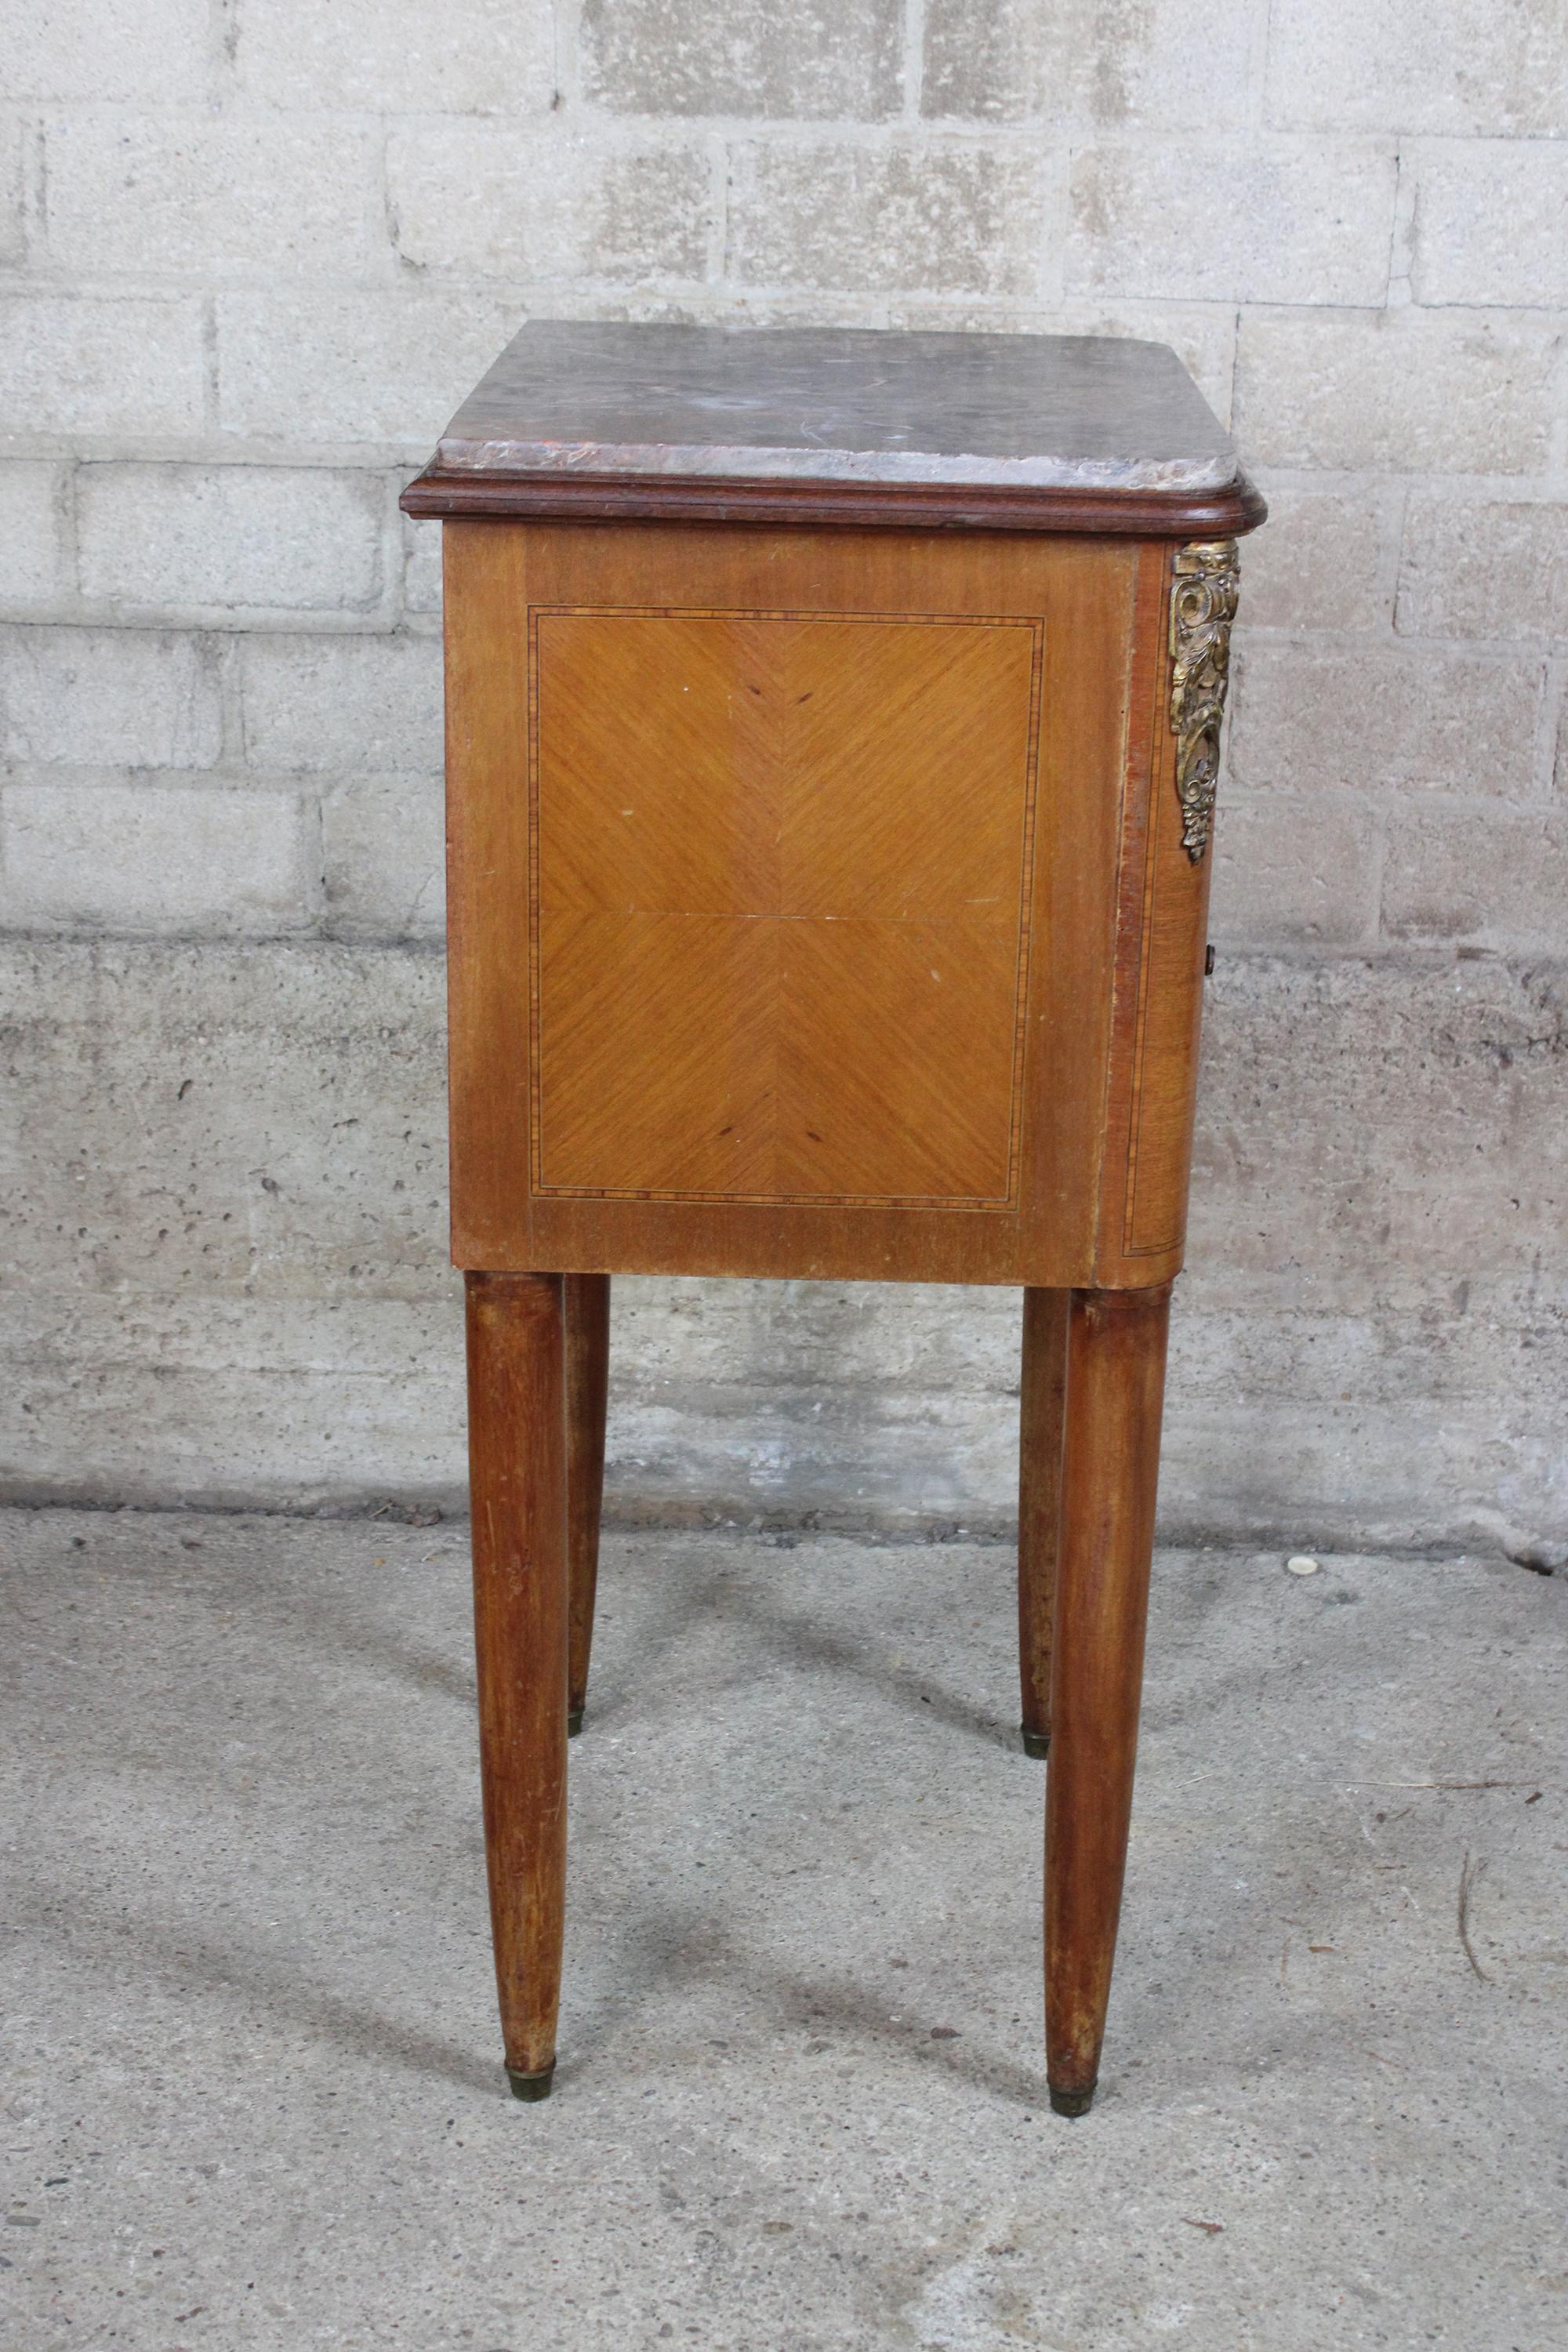 Antique French Walnut Marble Top Tobacco Humidor Stand Cabinet End Table 3